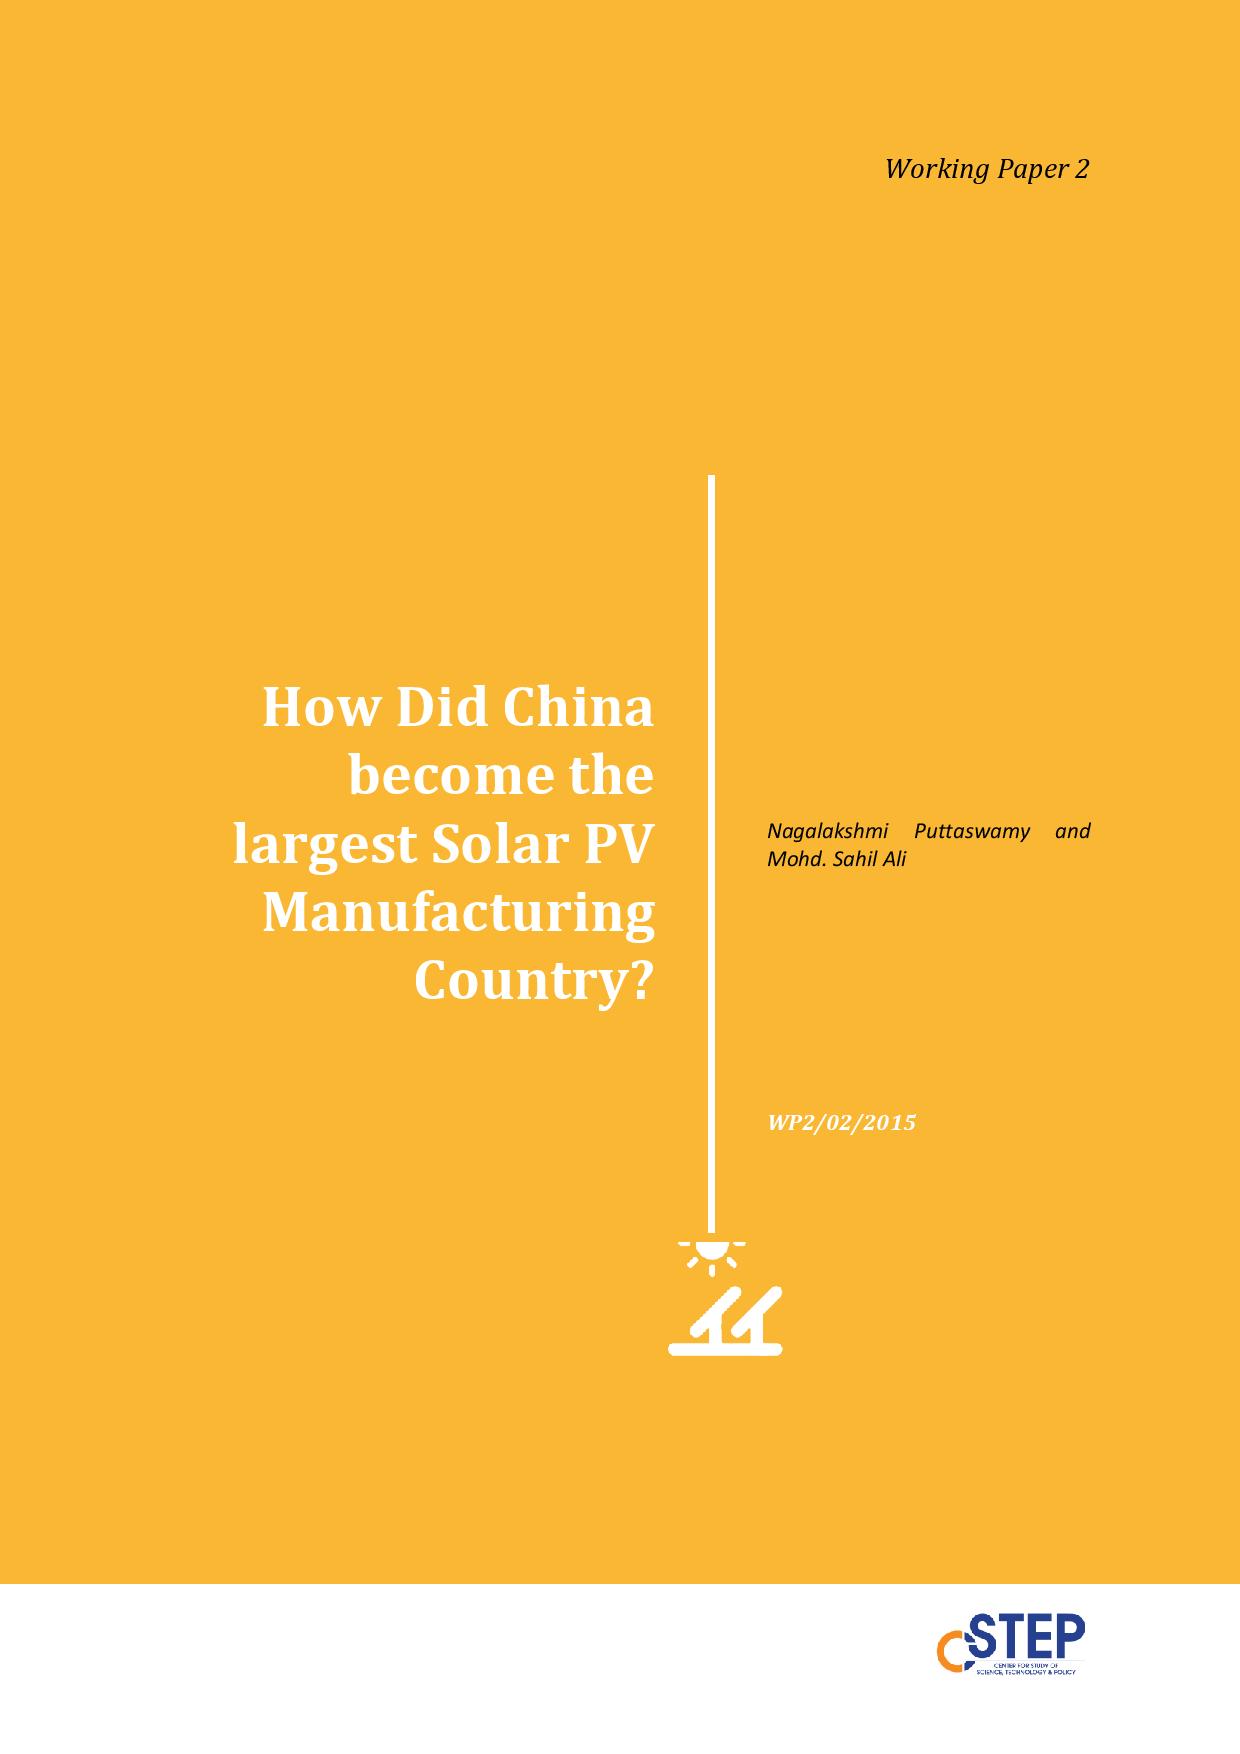 How Did China Become the Largest Solar PV Manufacturing Country?